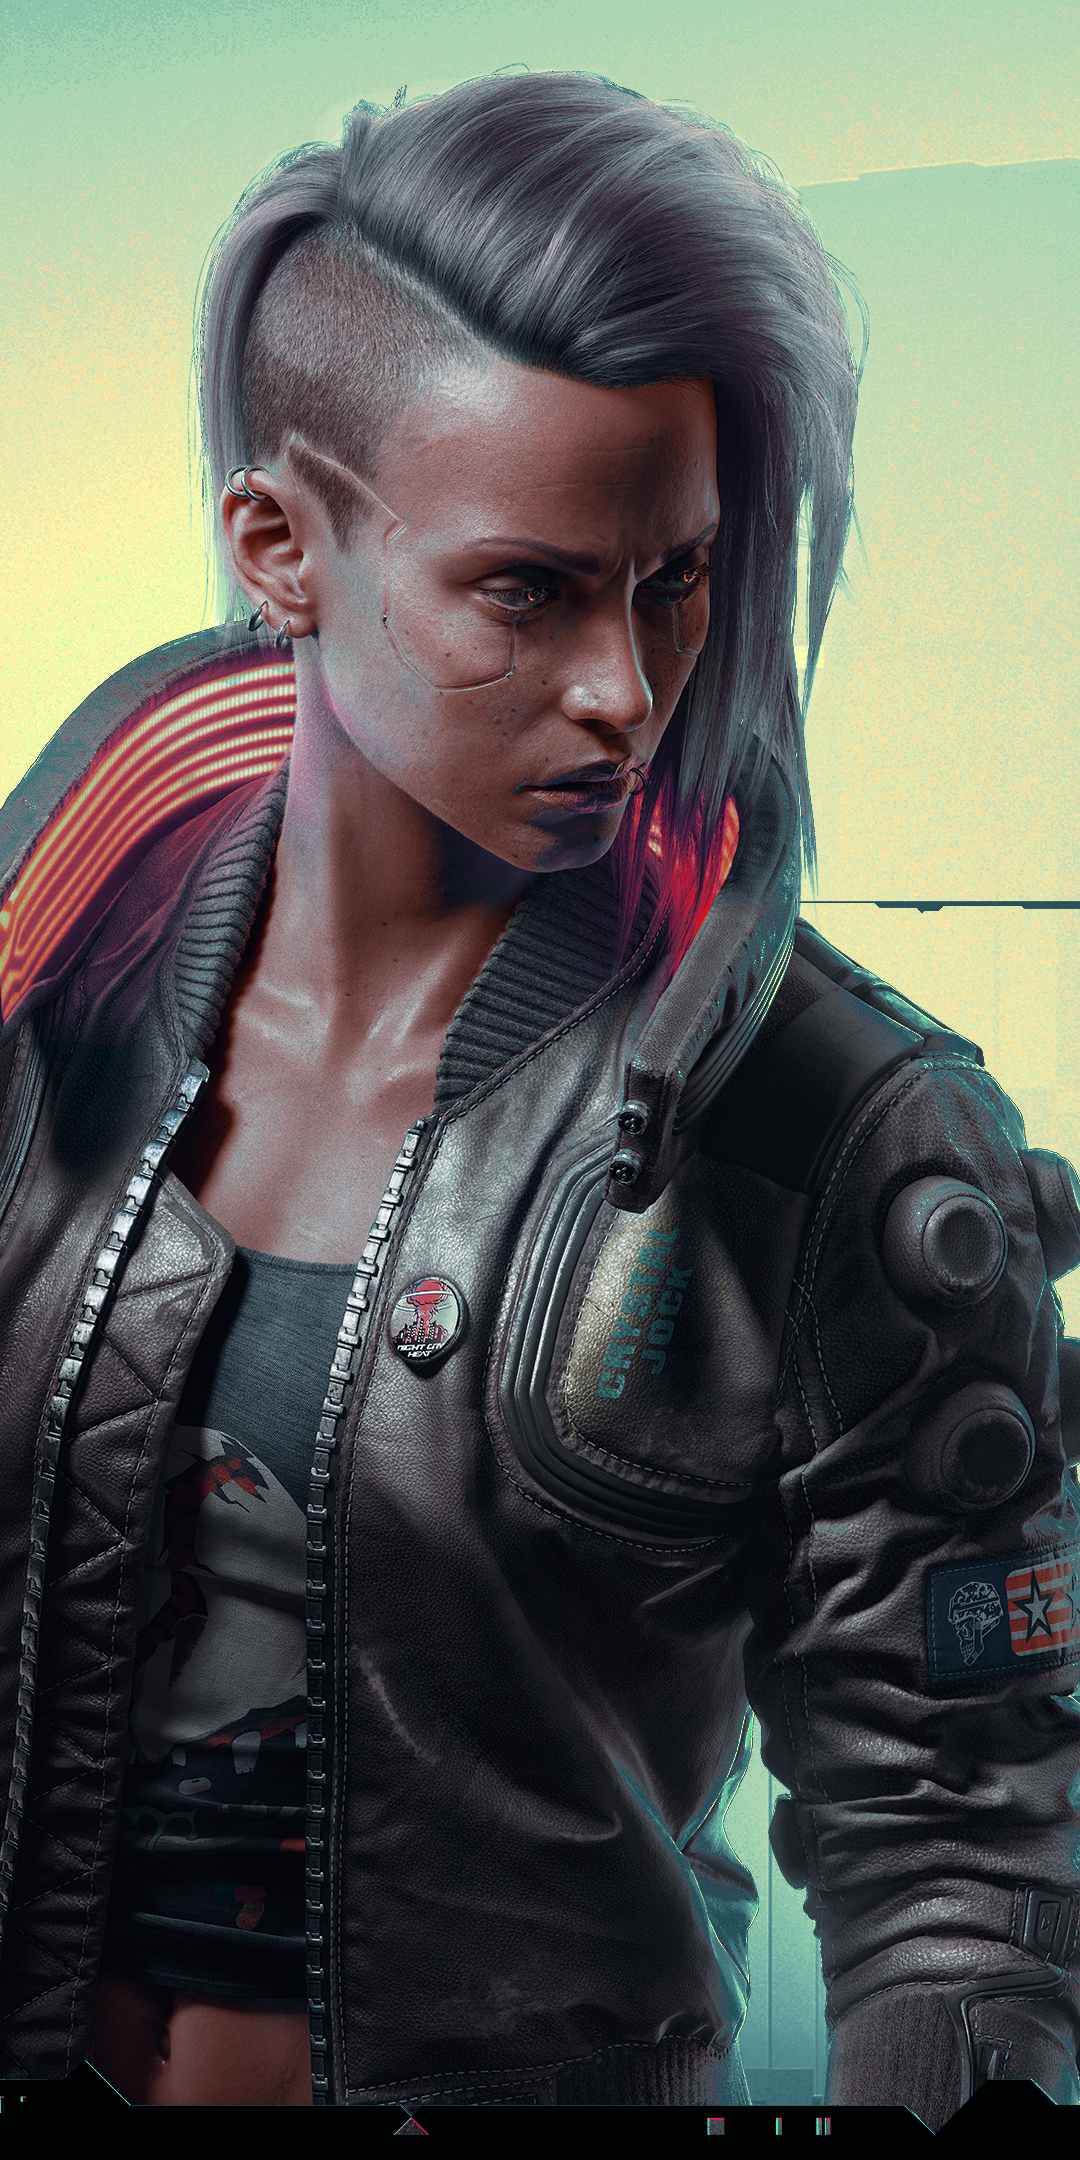 Cyberpunk 2077 Phone Wallpaper by Six0_o - Mobile Abyss